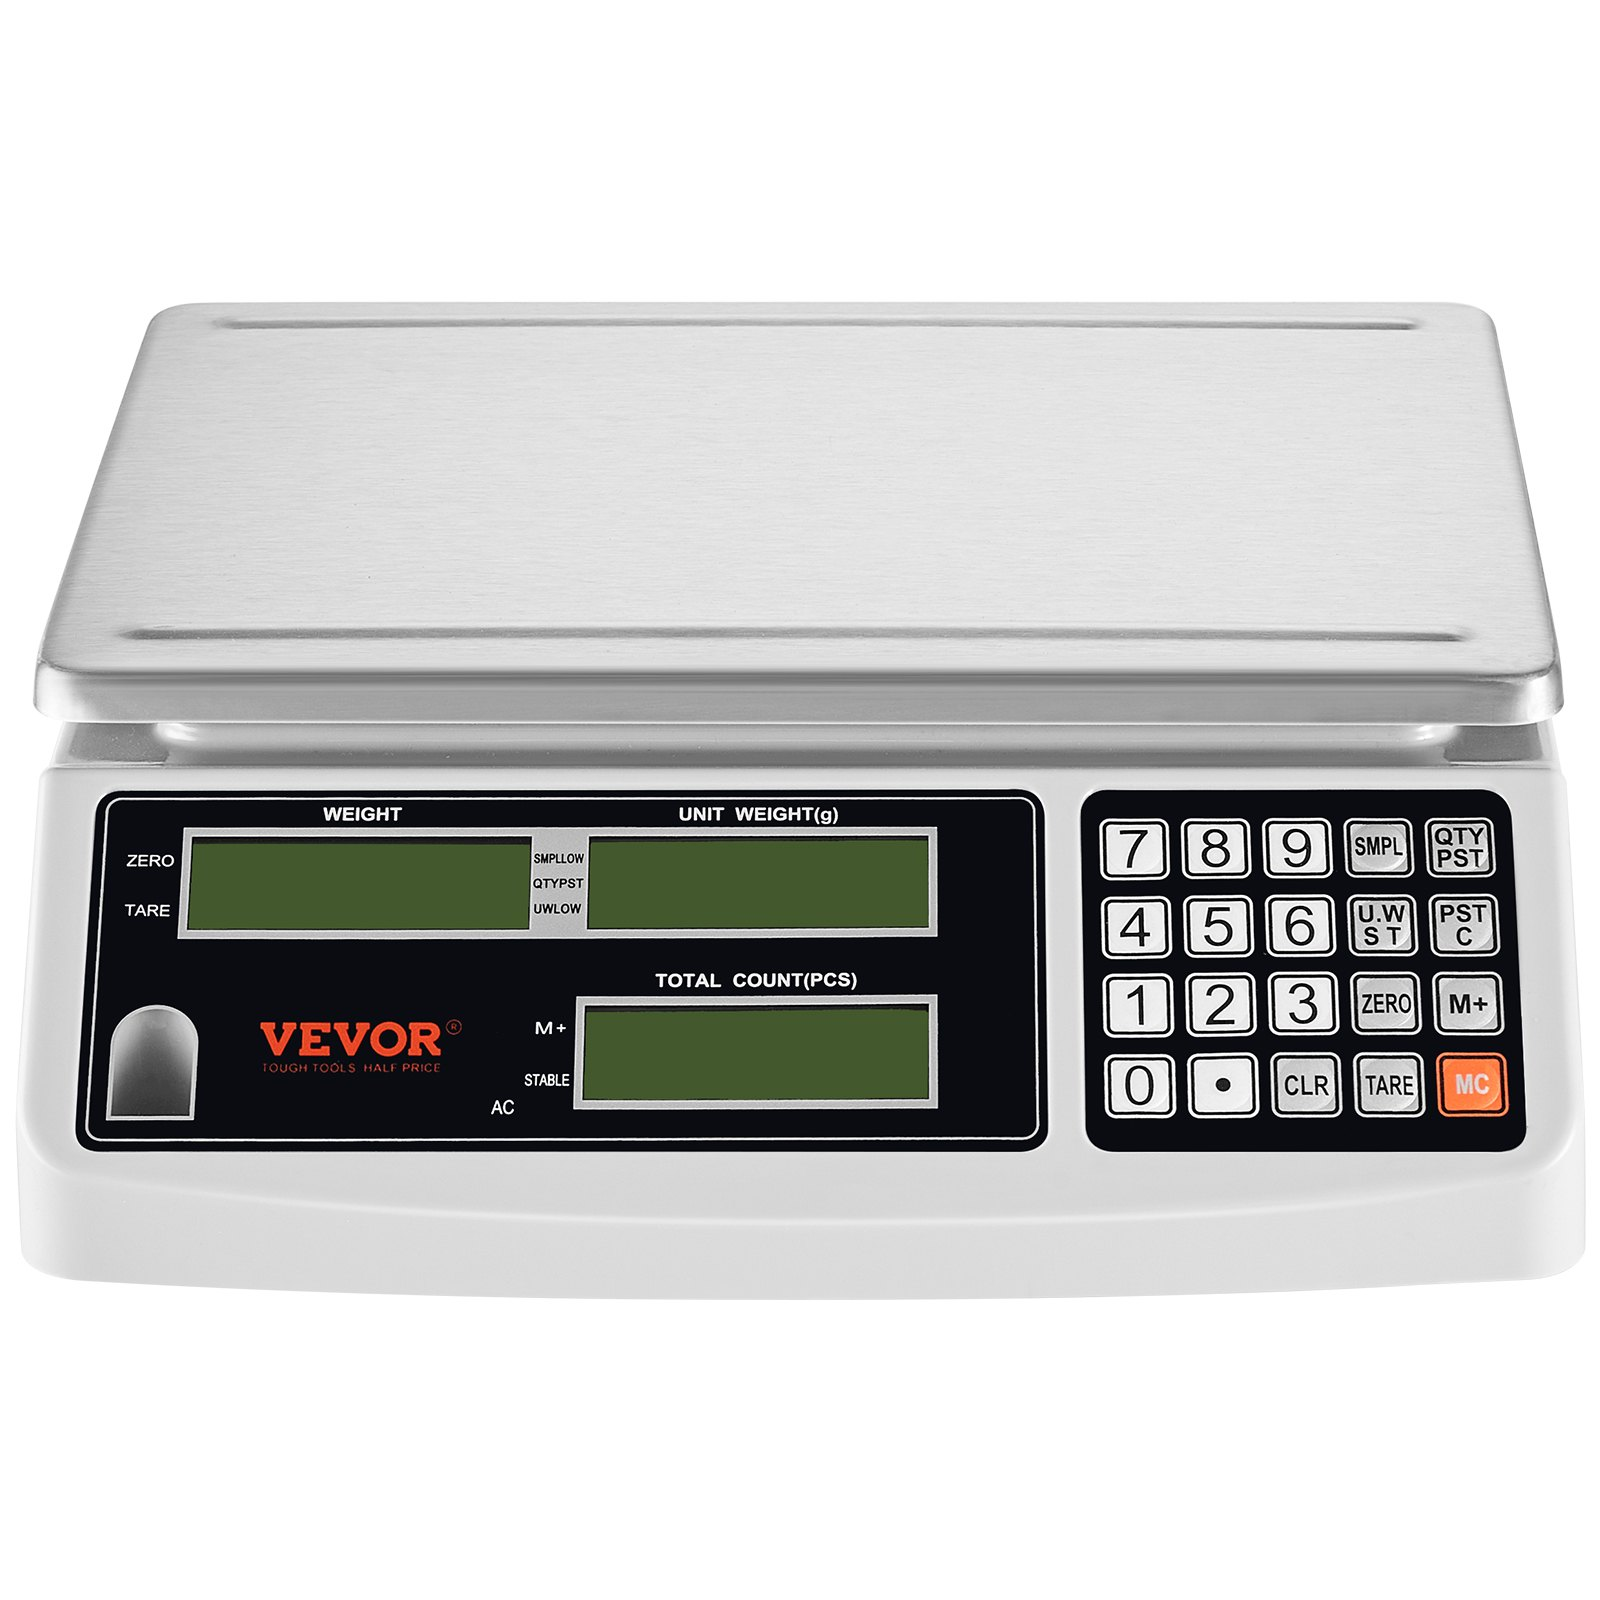 VEVOR Industrial Counting Scale, 30 kg x 1 g, Digital Scale for Parts and Coins, g/kg/lb Units, Electronic Gram Scale Inventory Piece Counting Scale Kitchen Jewelry Counting Scale with 3 LCD Screens, Goodies N Stuff